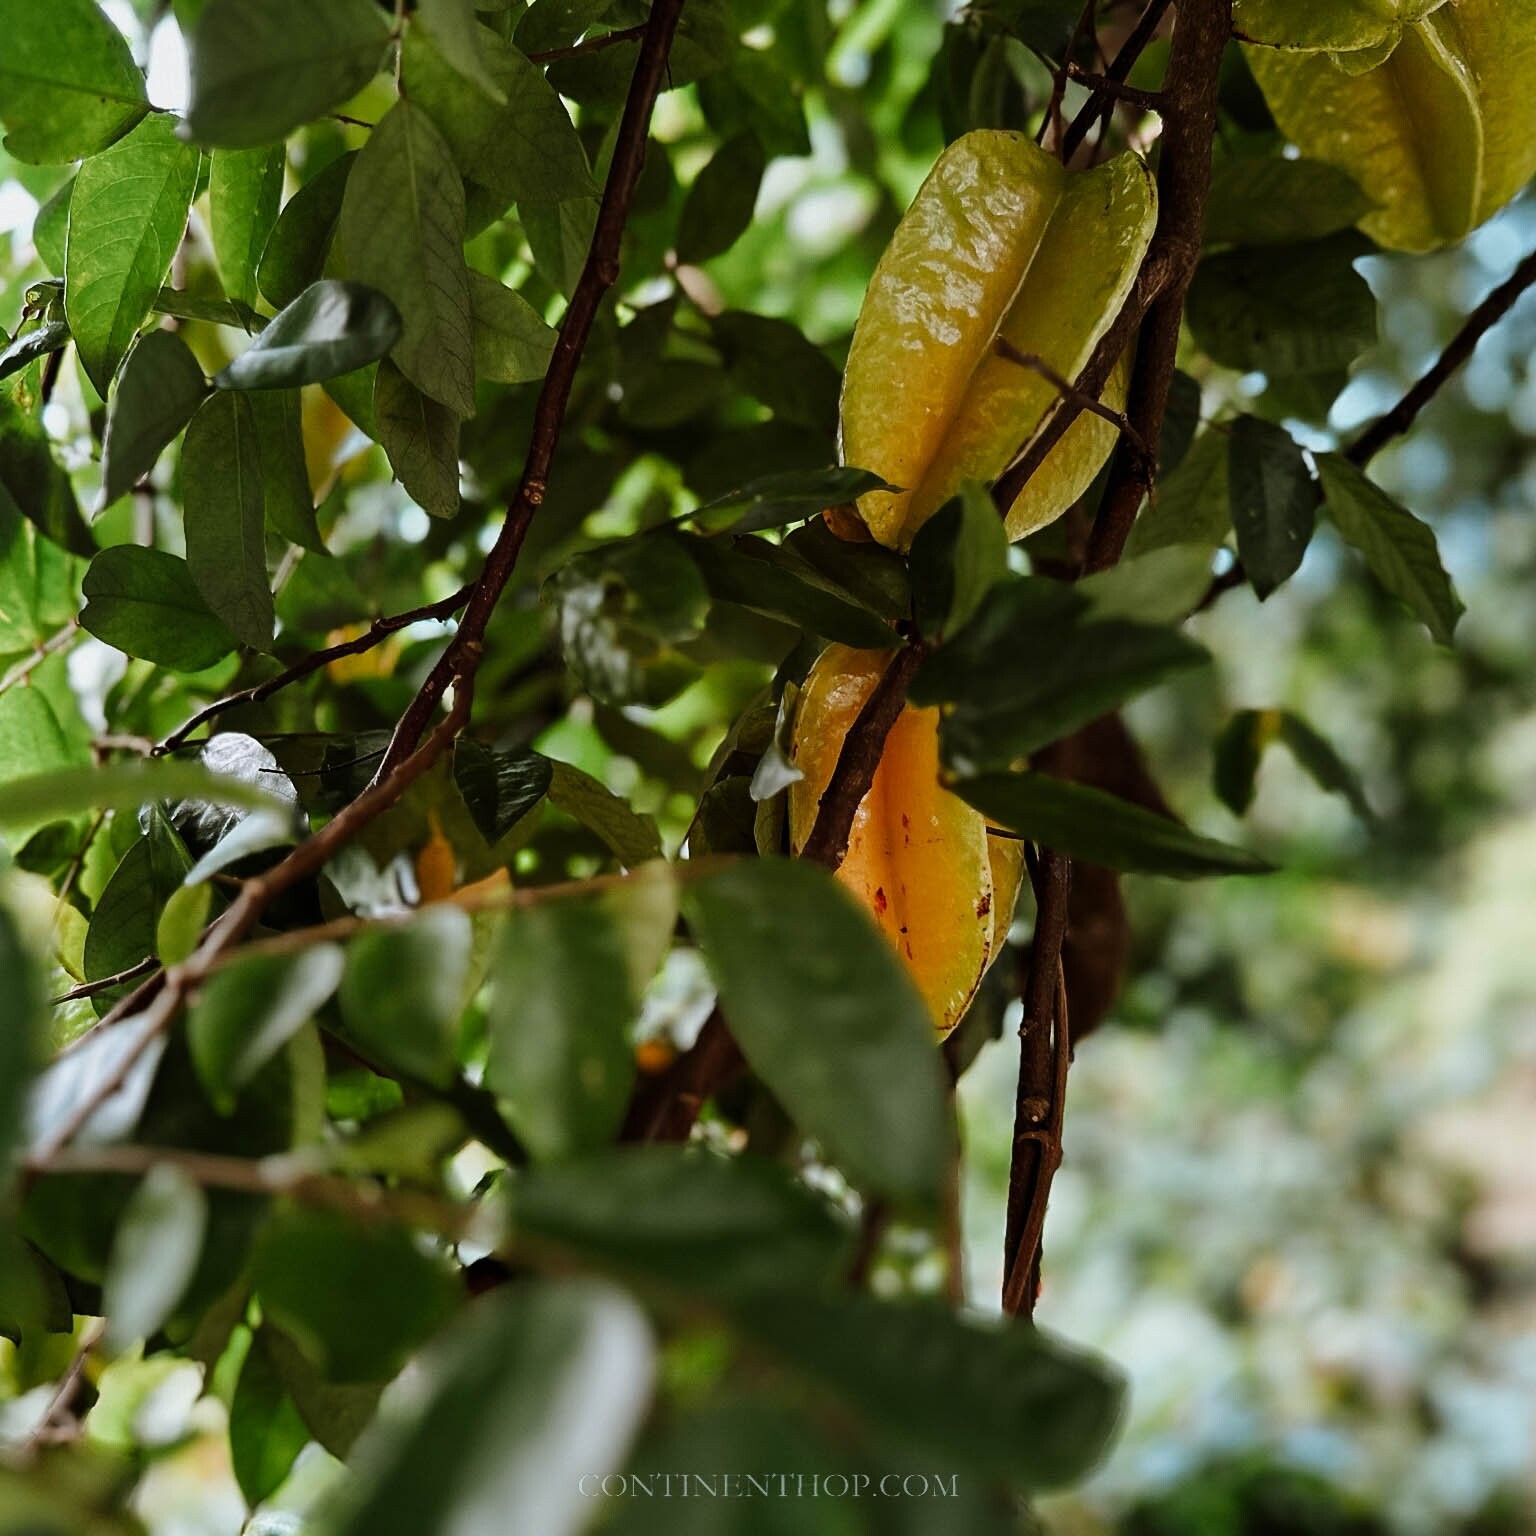 Star fruit hanging from the tree in December best time to visit Grenada Caribbean